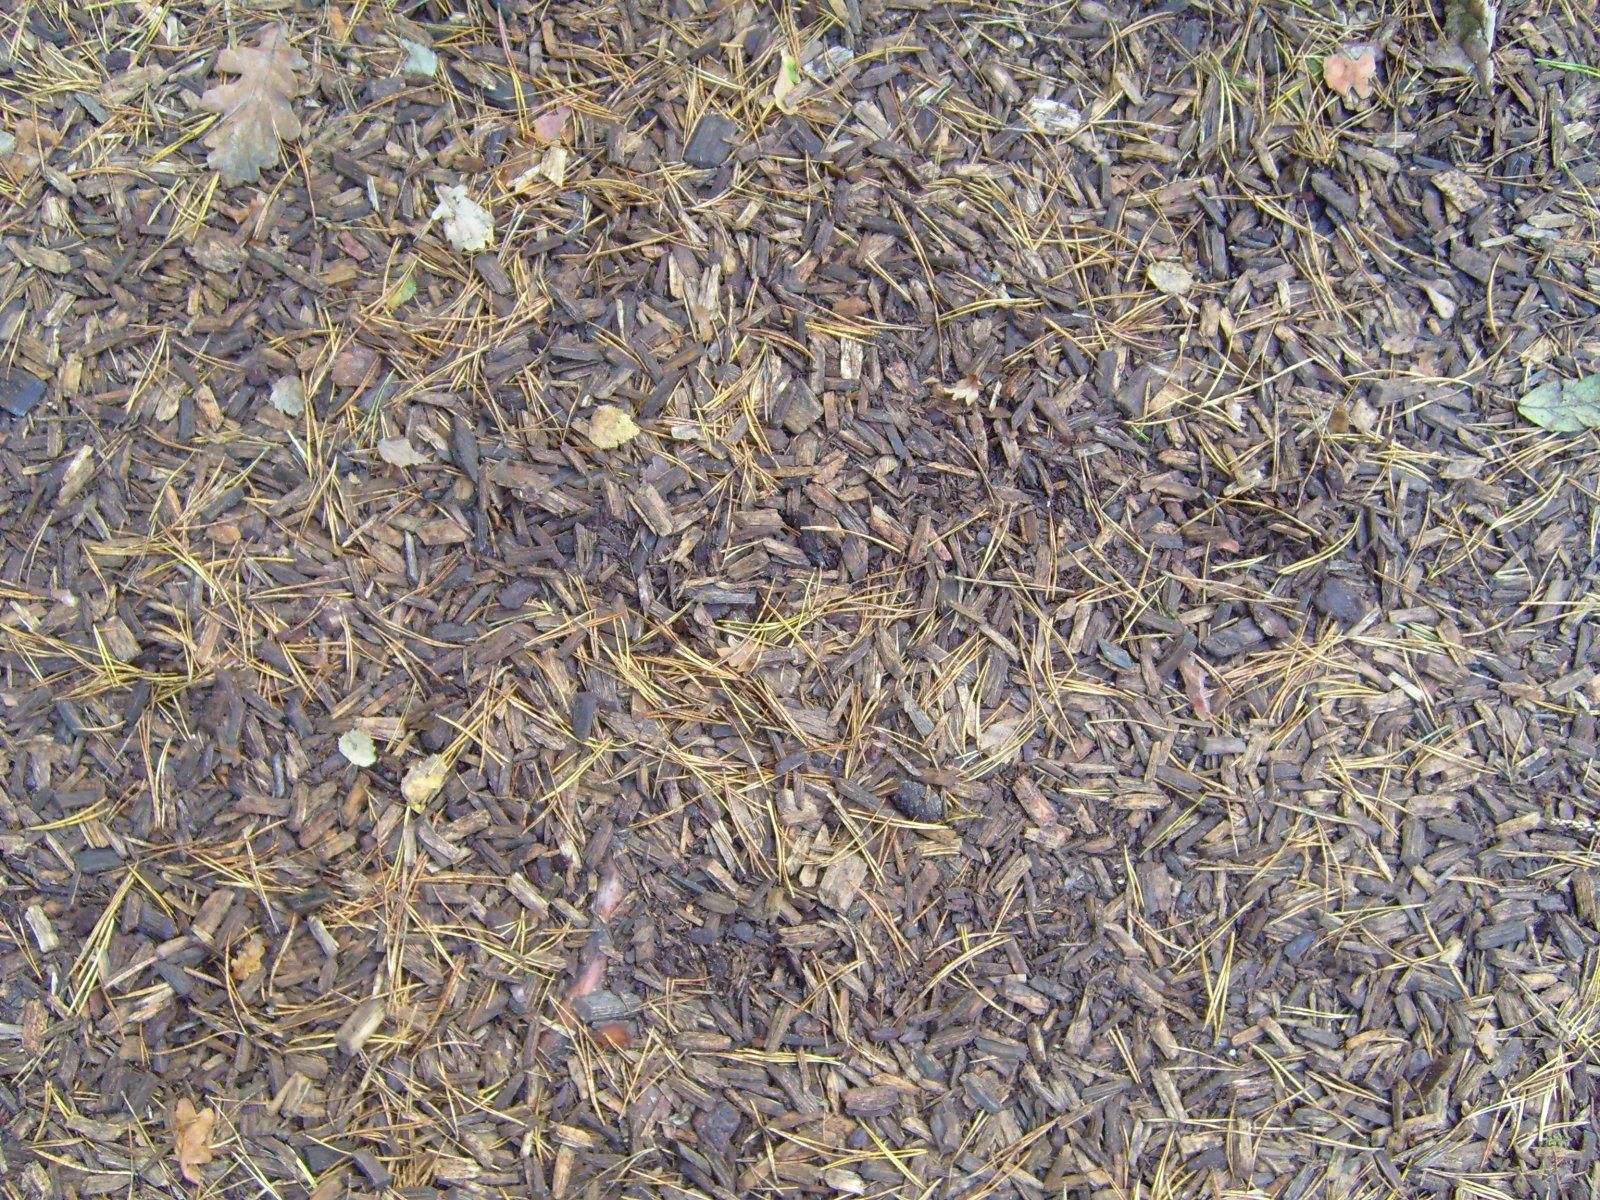 File:Forest ground wood chips pine needles.jpg - Wikimedia Commons